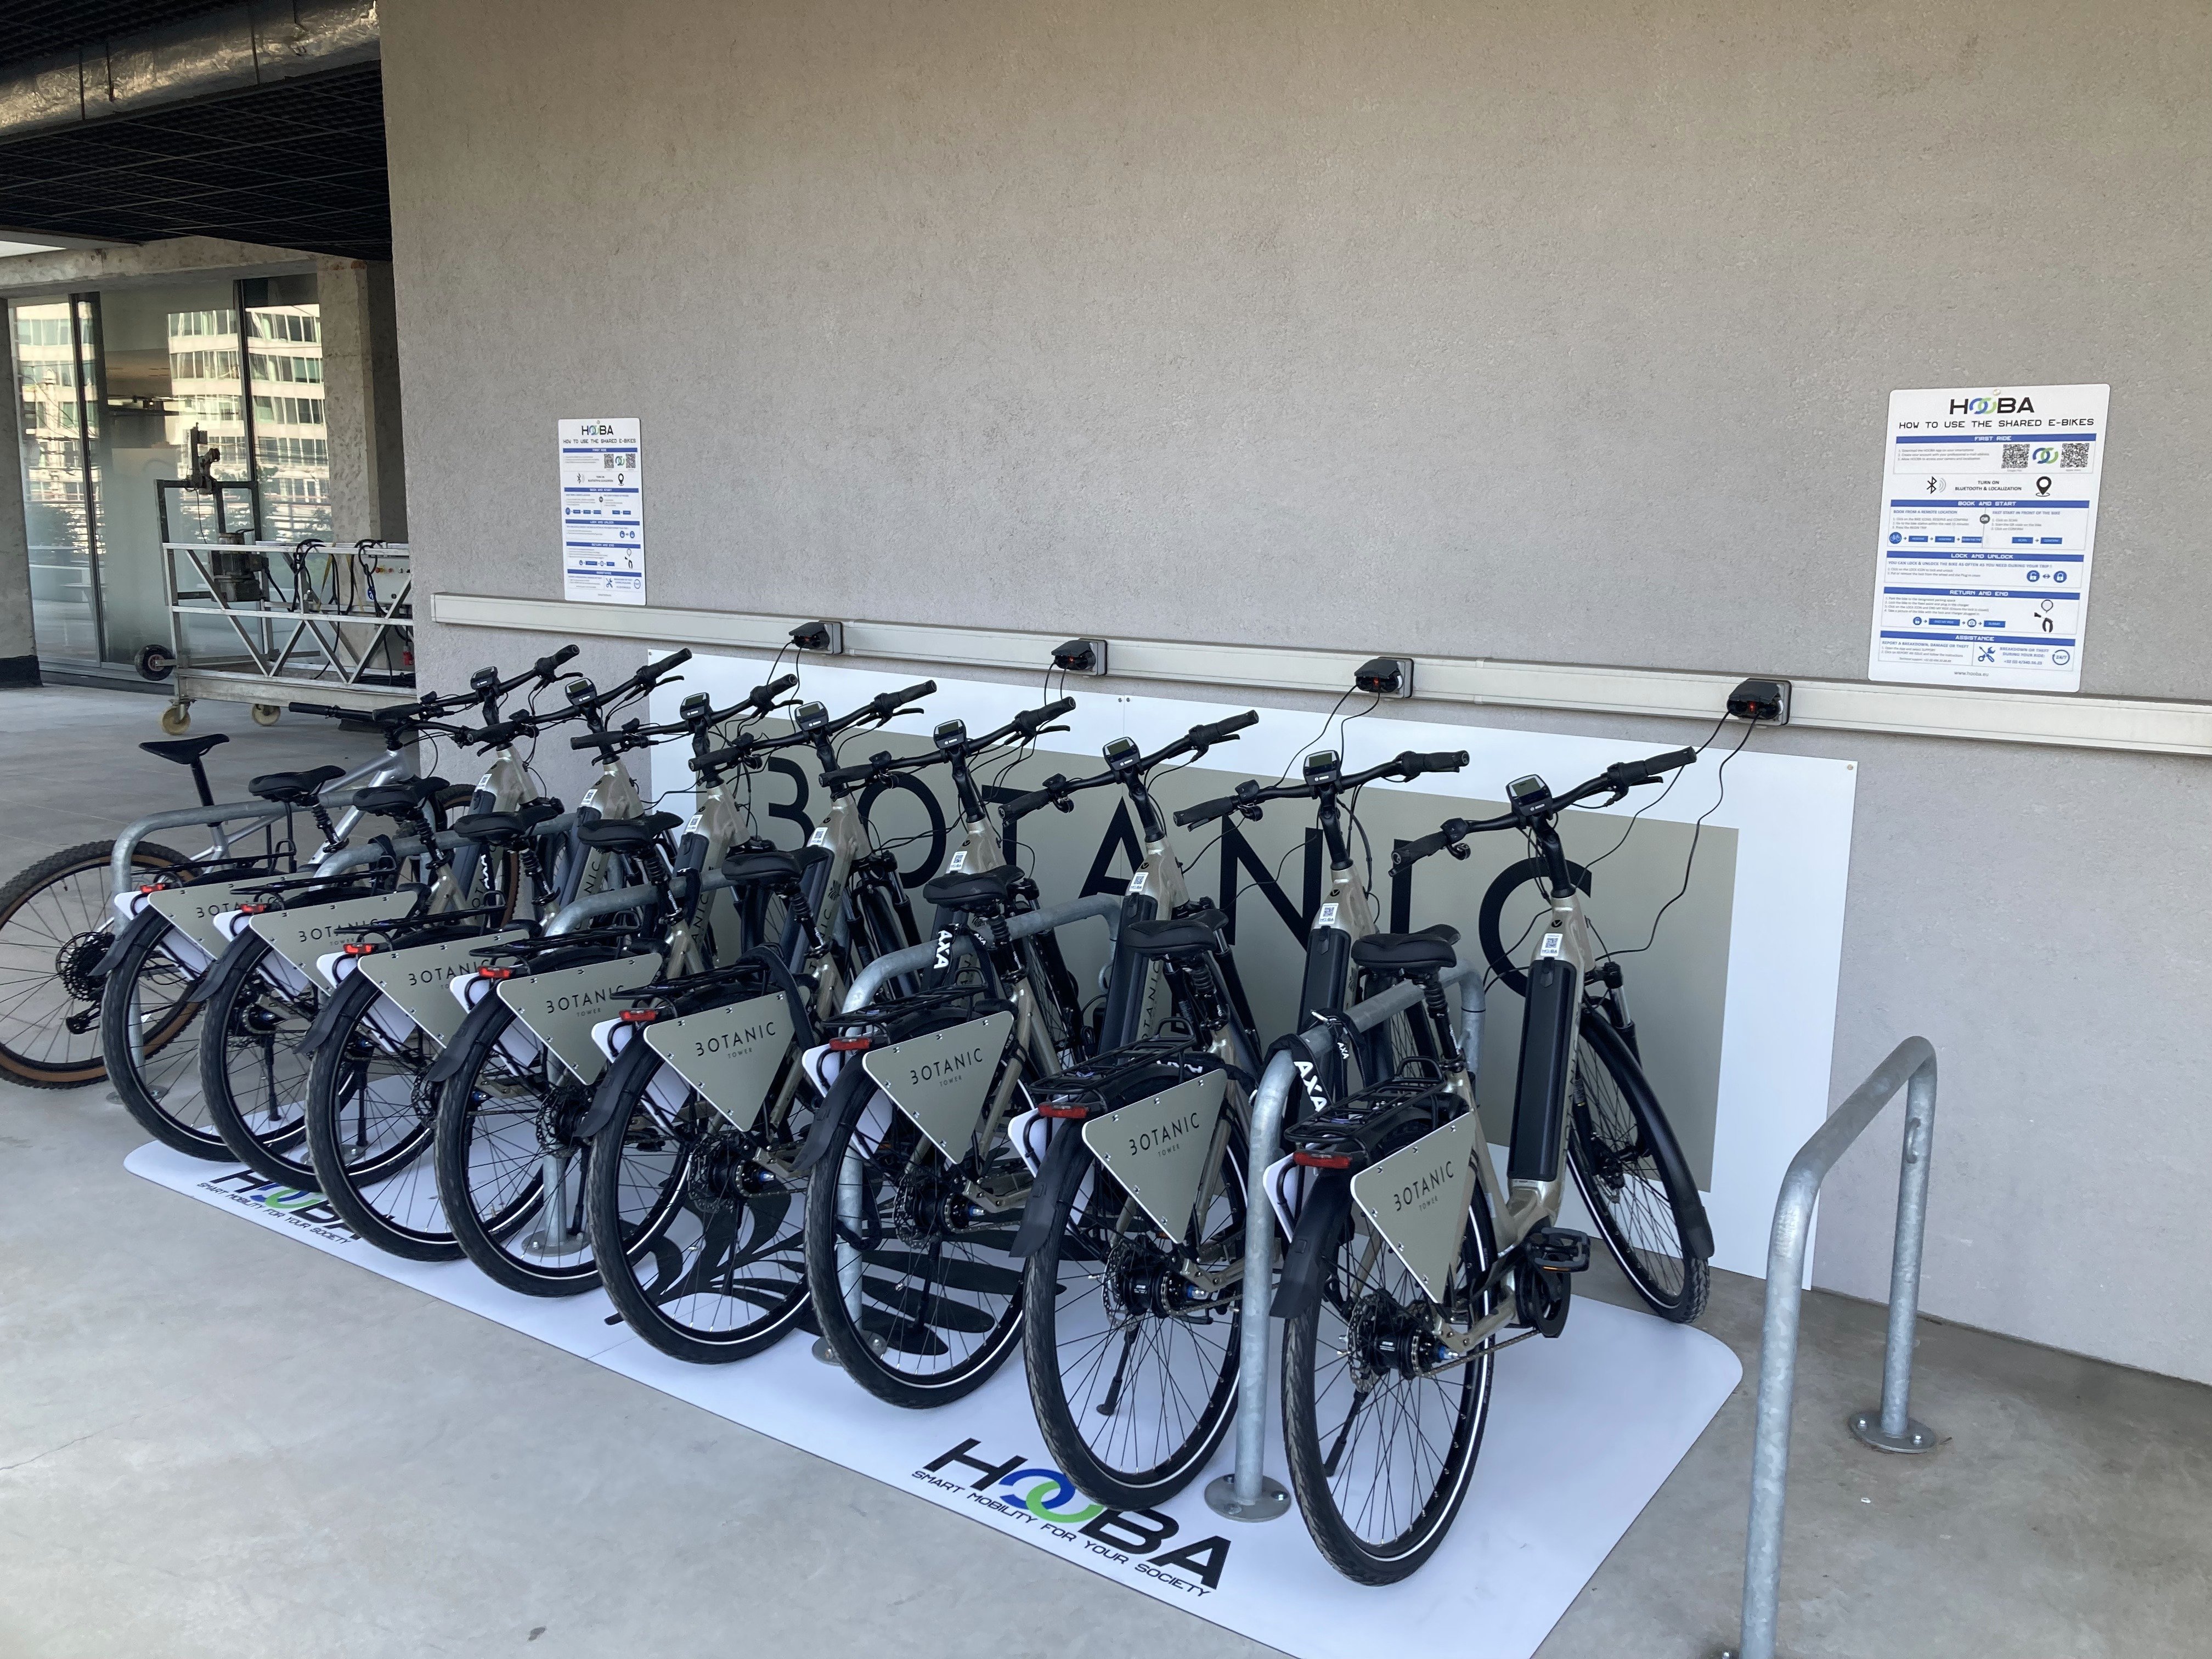  Example of occupied parking space offered in our bike rental service